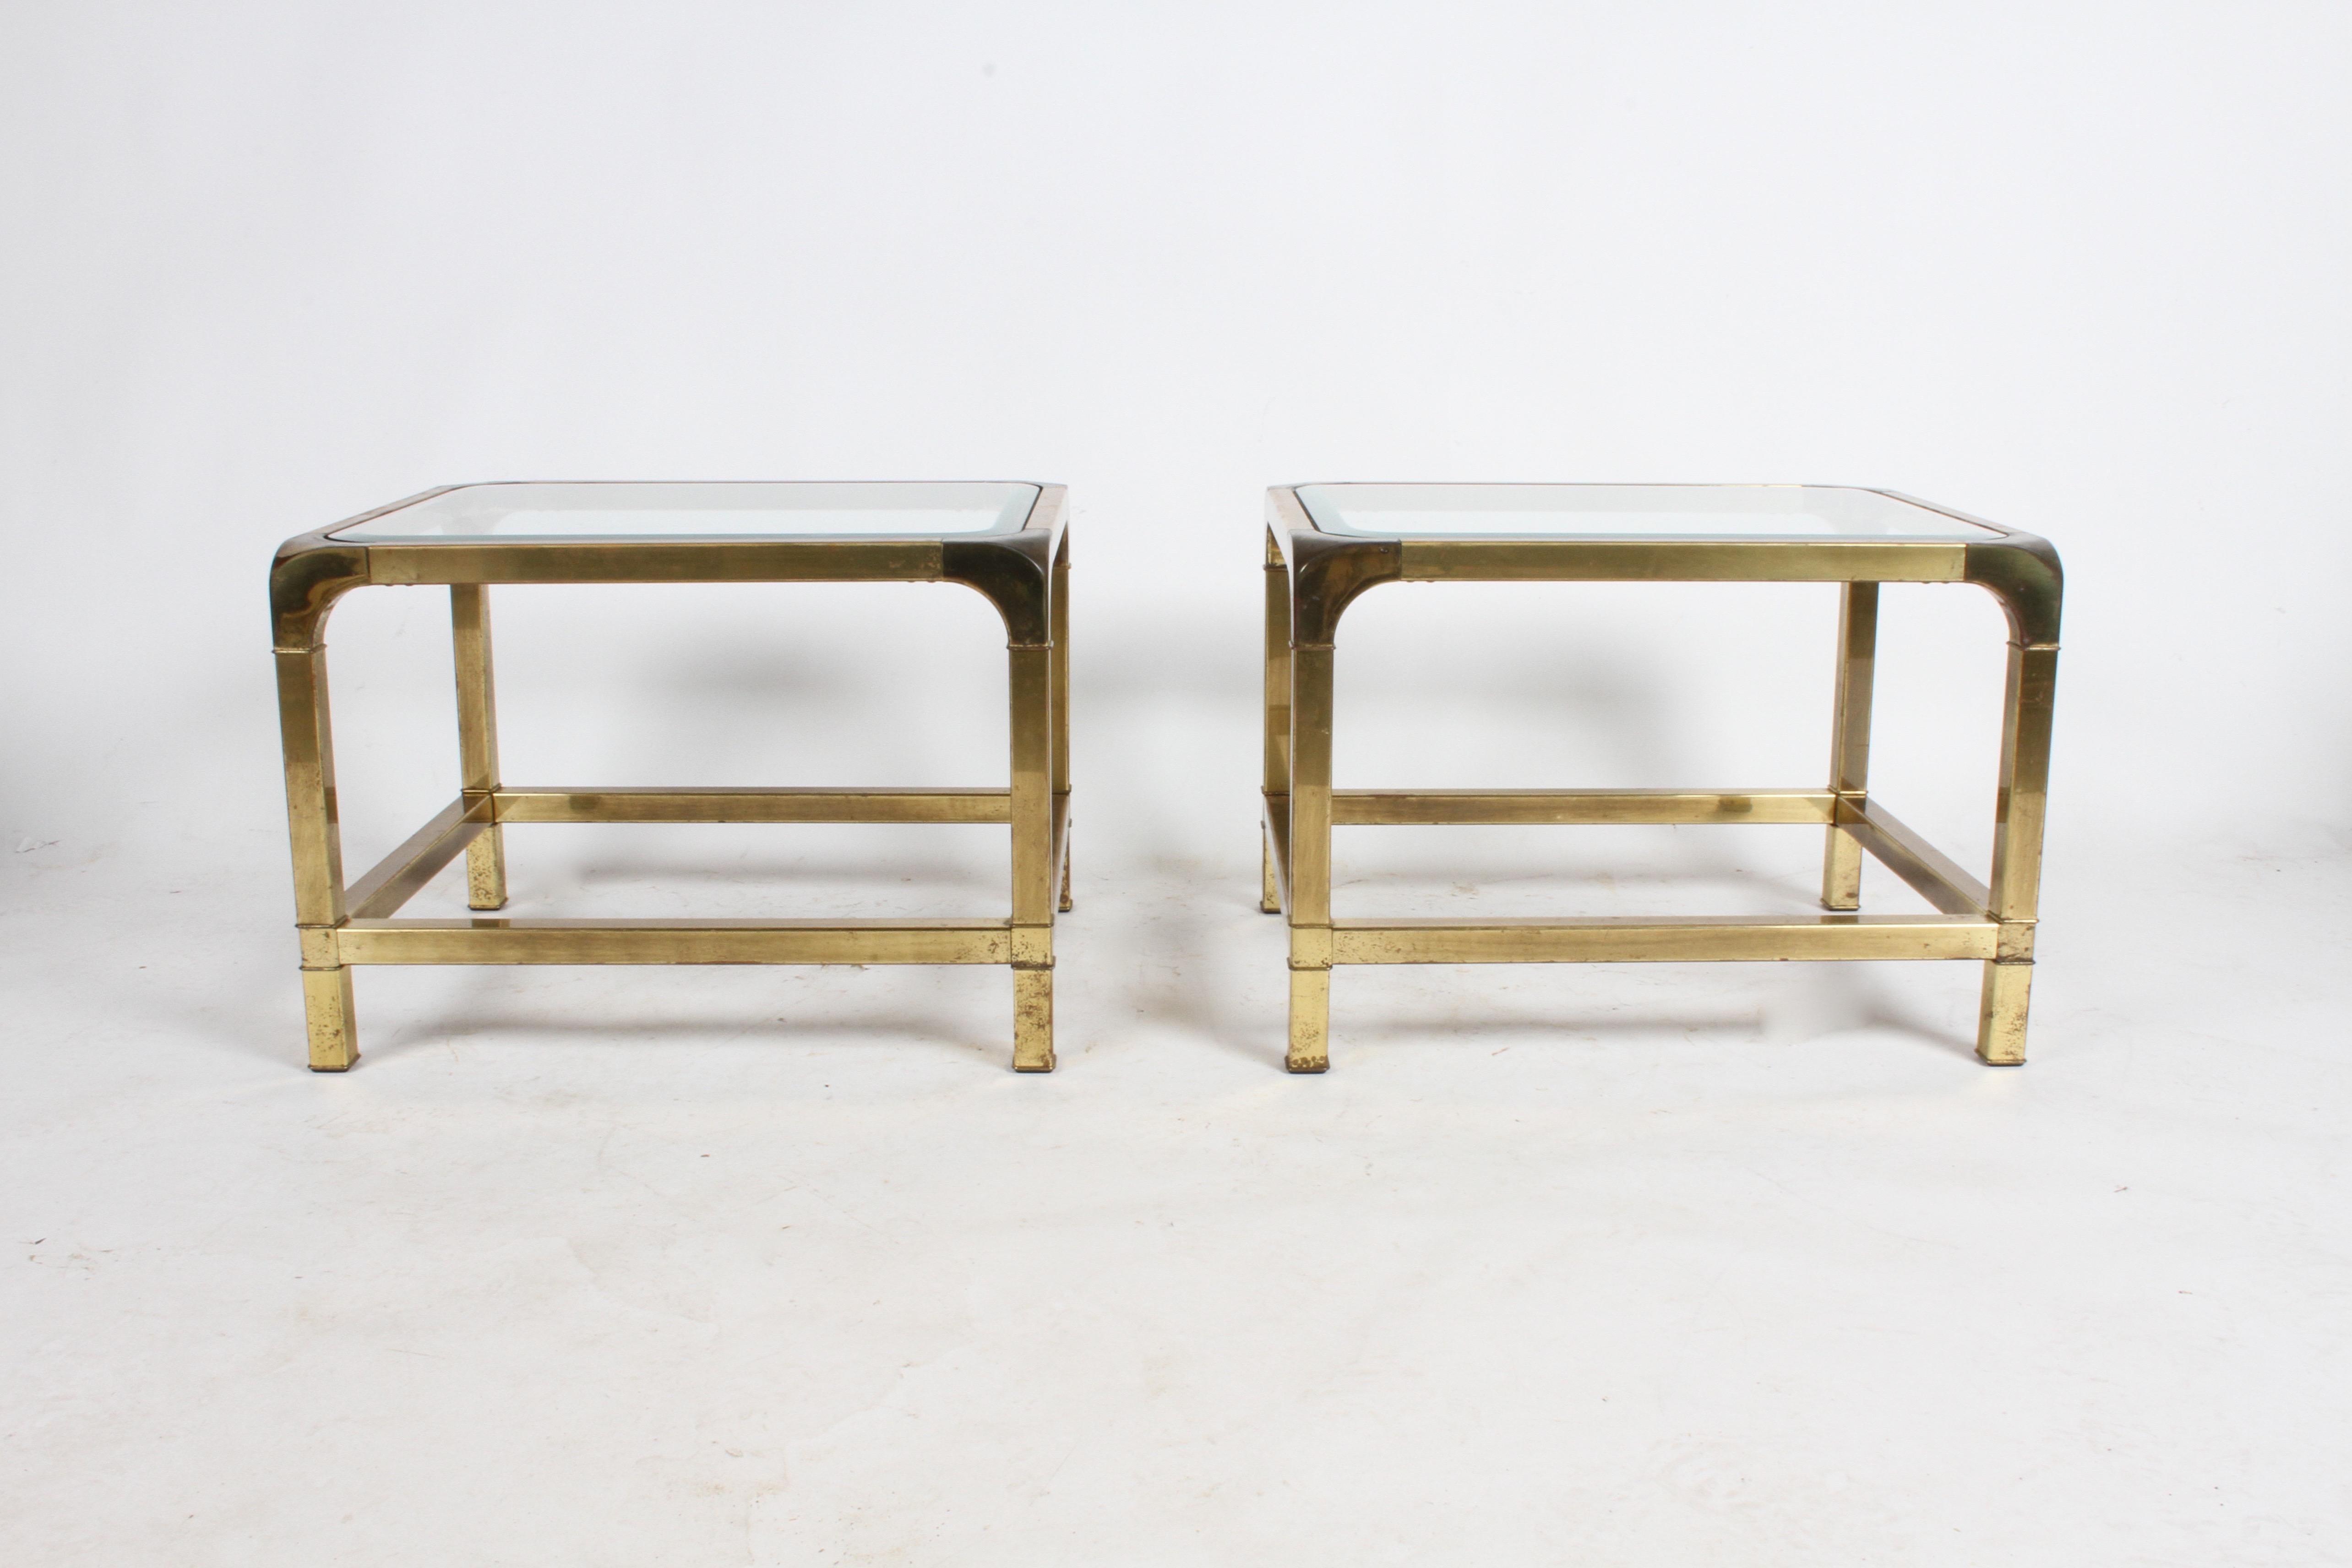 Pair of Mastercraft Asian influenced brass end tables with glass tops. Heavy patina to brass, glass has 1